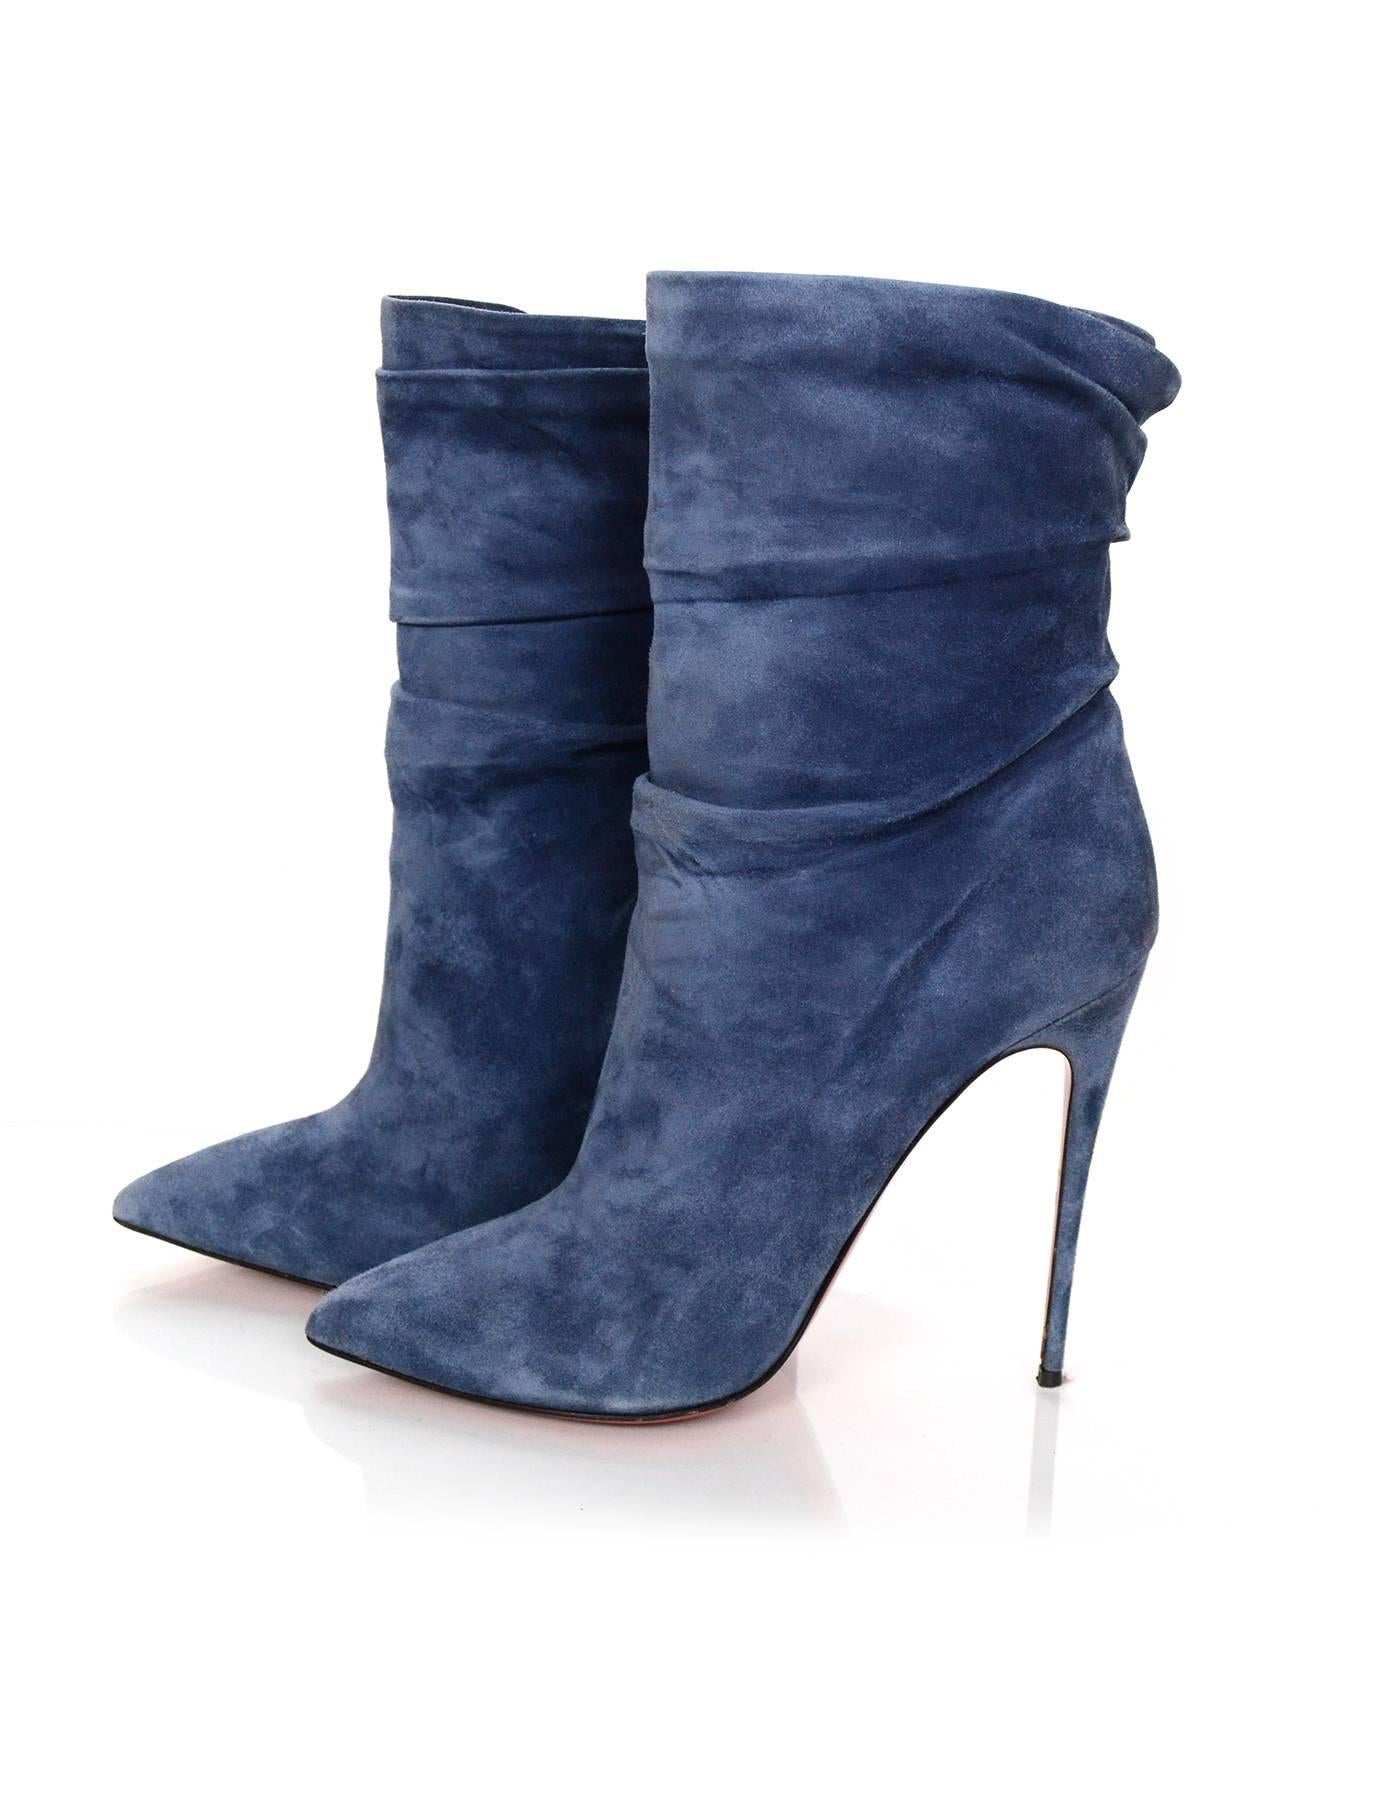 Christian Louboutin Blue Suede Short Boots 
Features ruching at shaft

Made In: Italy
Color: Blue
Materials: Suede
Closure/Opening: Pull on
Sole Stamp: Christian Louboutin Made in Italy 41
Overall Condition: Excellent pre-owned condition with the